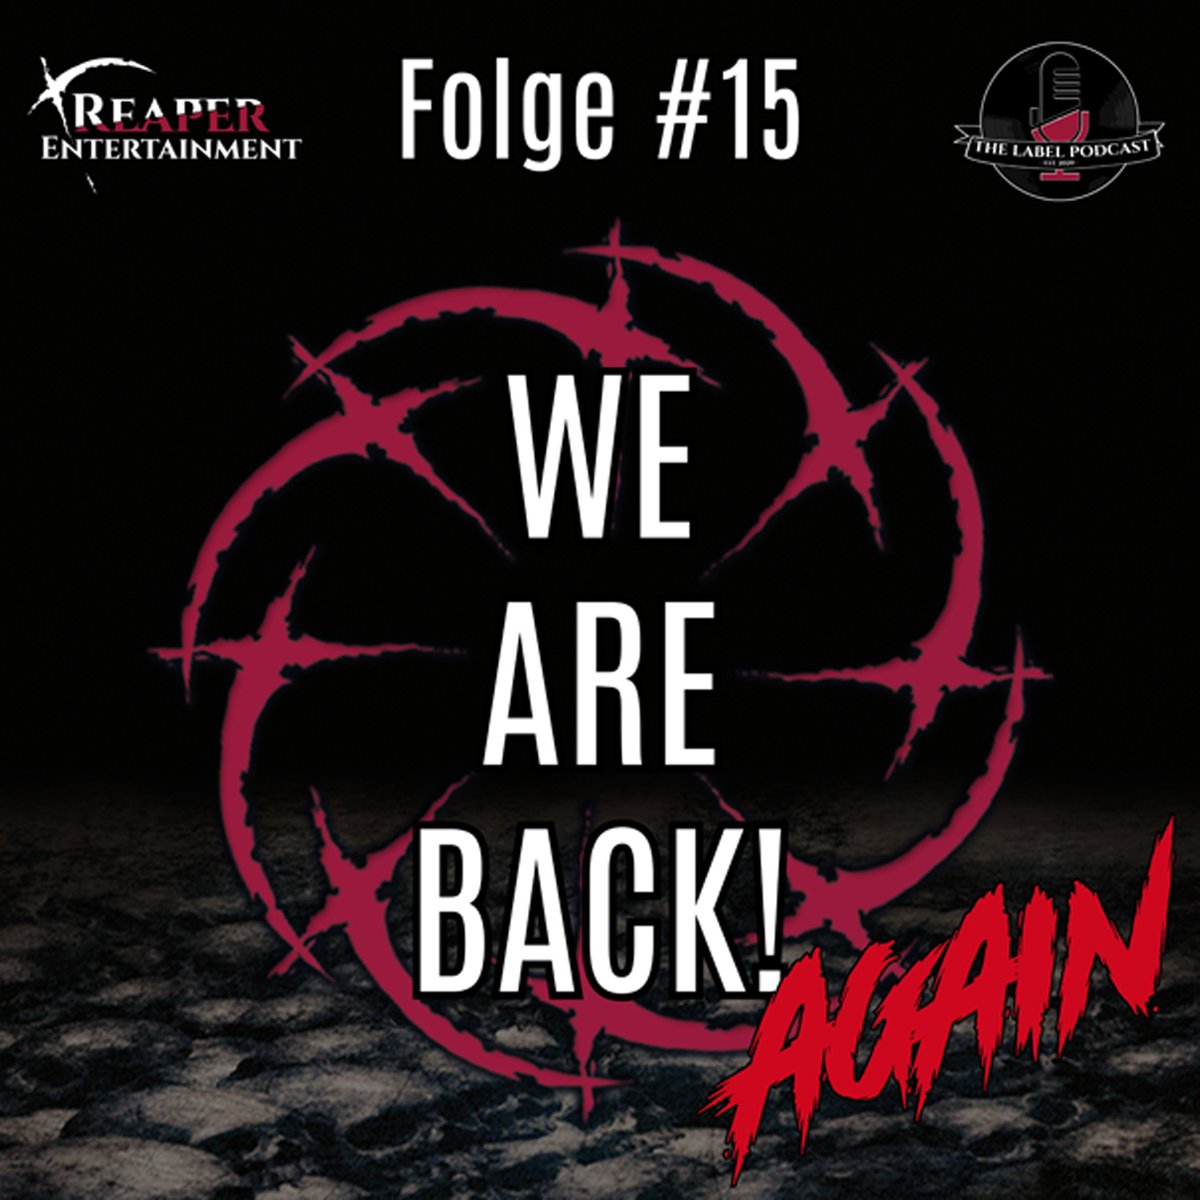 Neue Folge vom Reaper Podcast ist online! 'We are Back....again' 🤘 Check it out (only German): open.spotify.com/show/5pB6W7ATN…